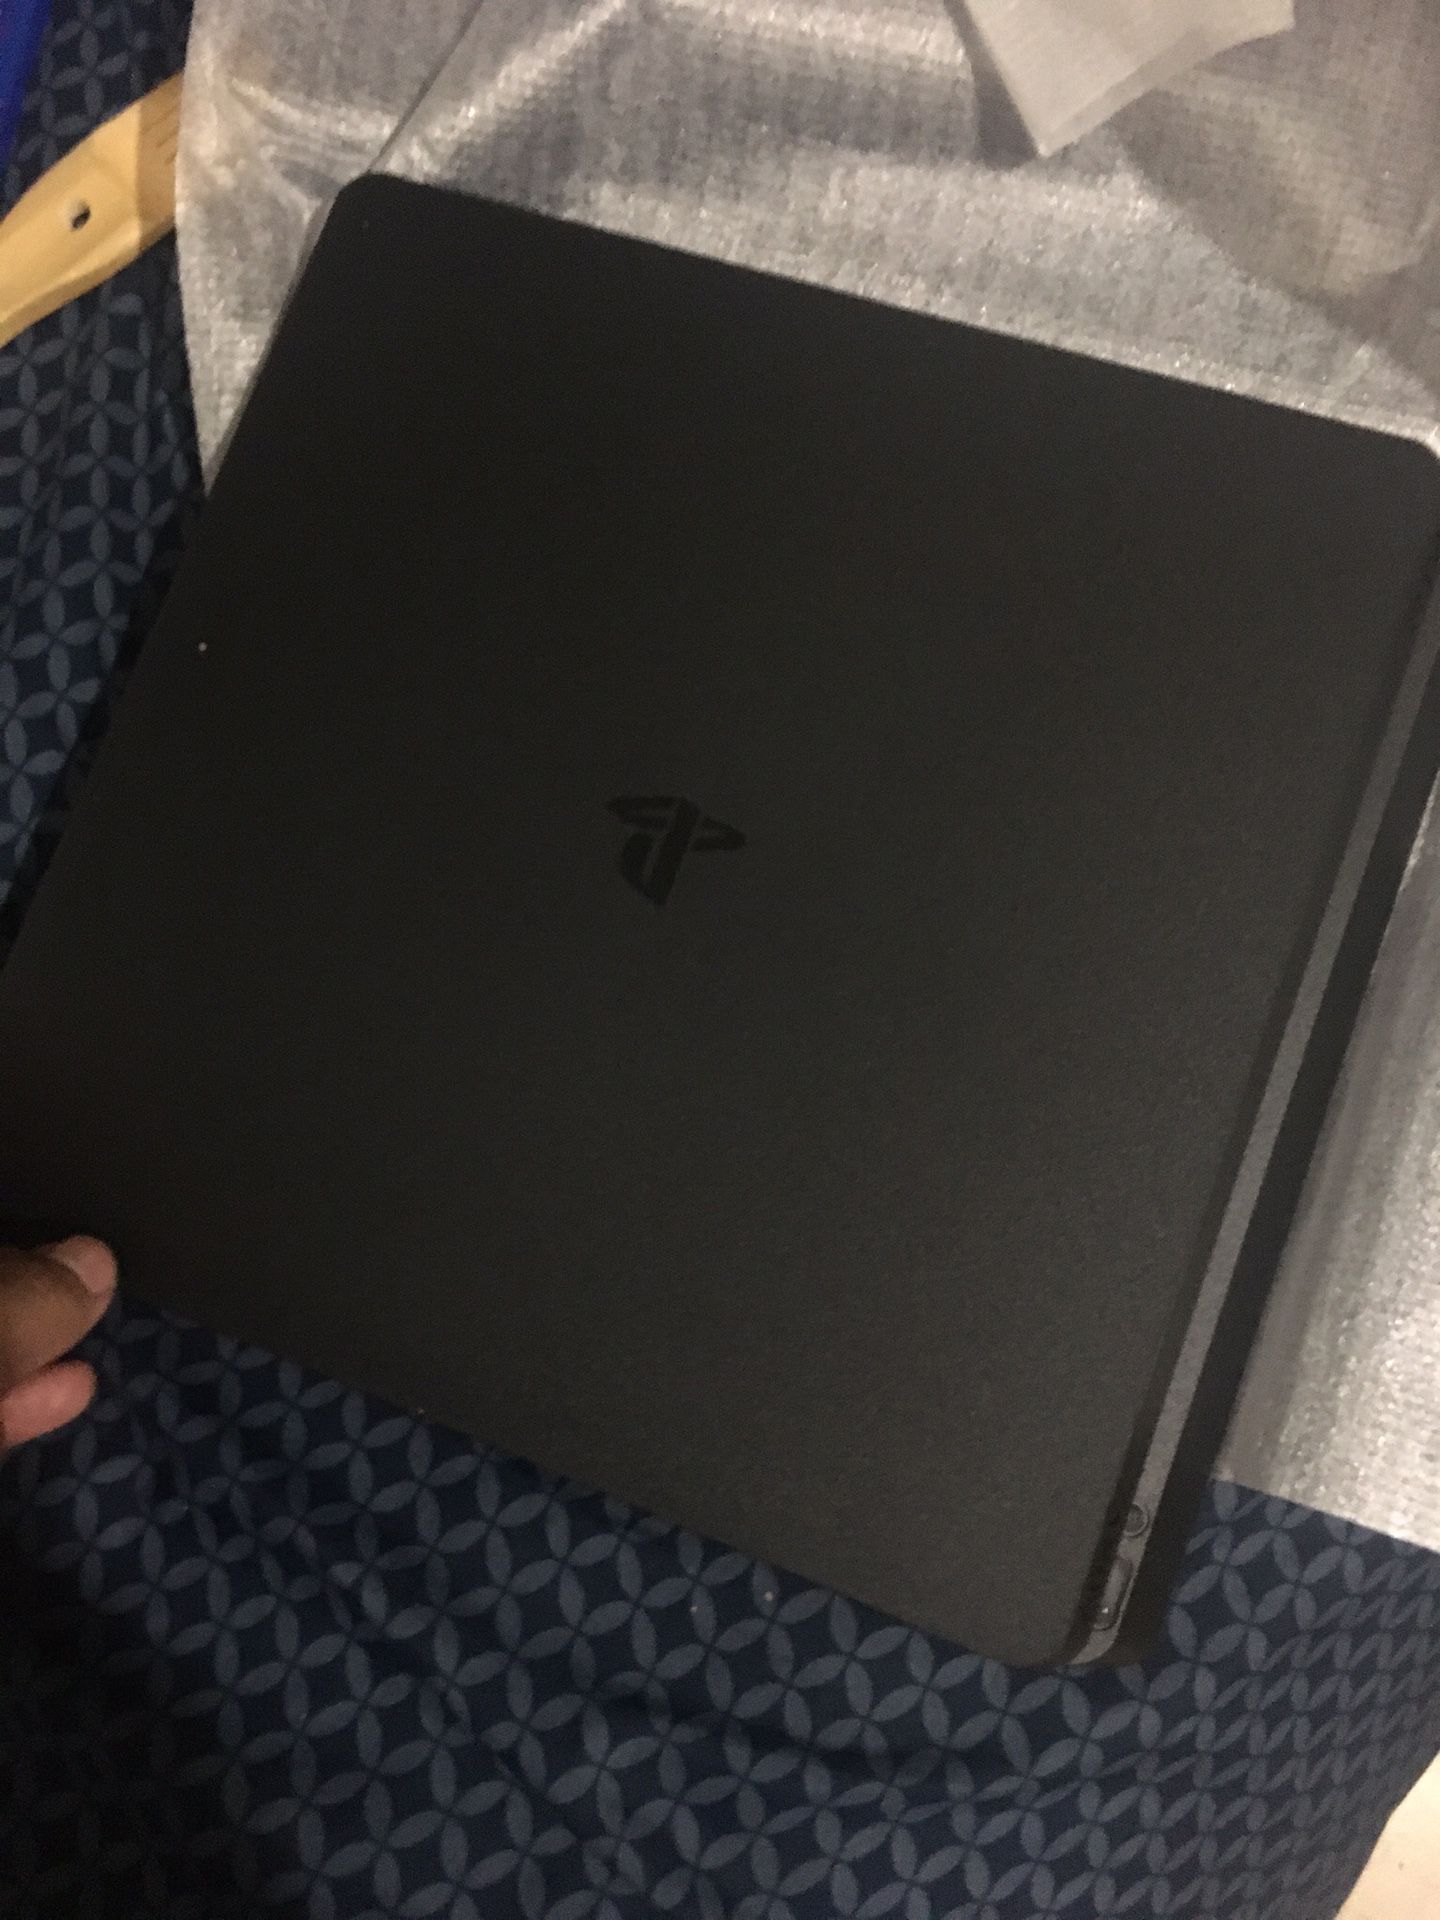 PS4 brand new